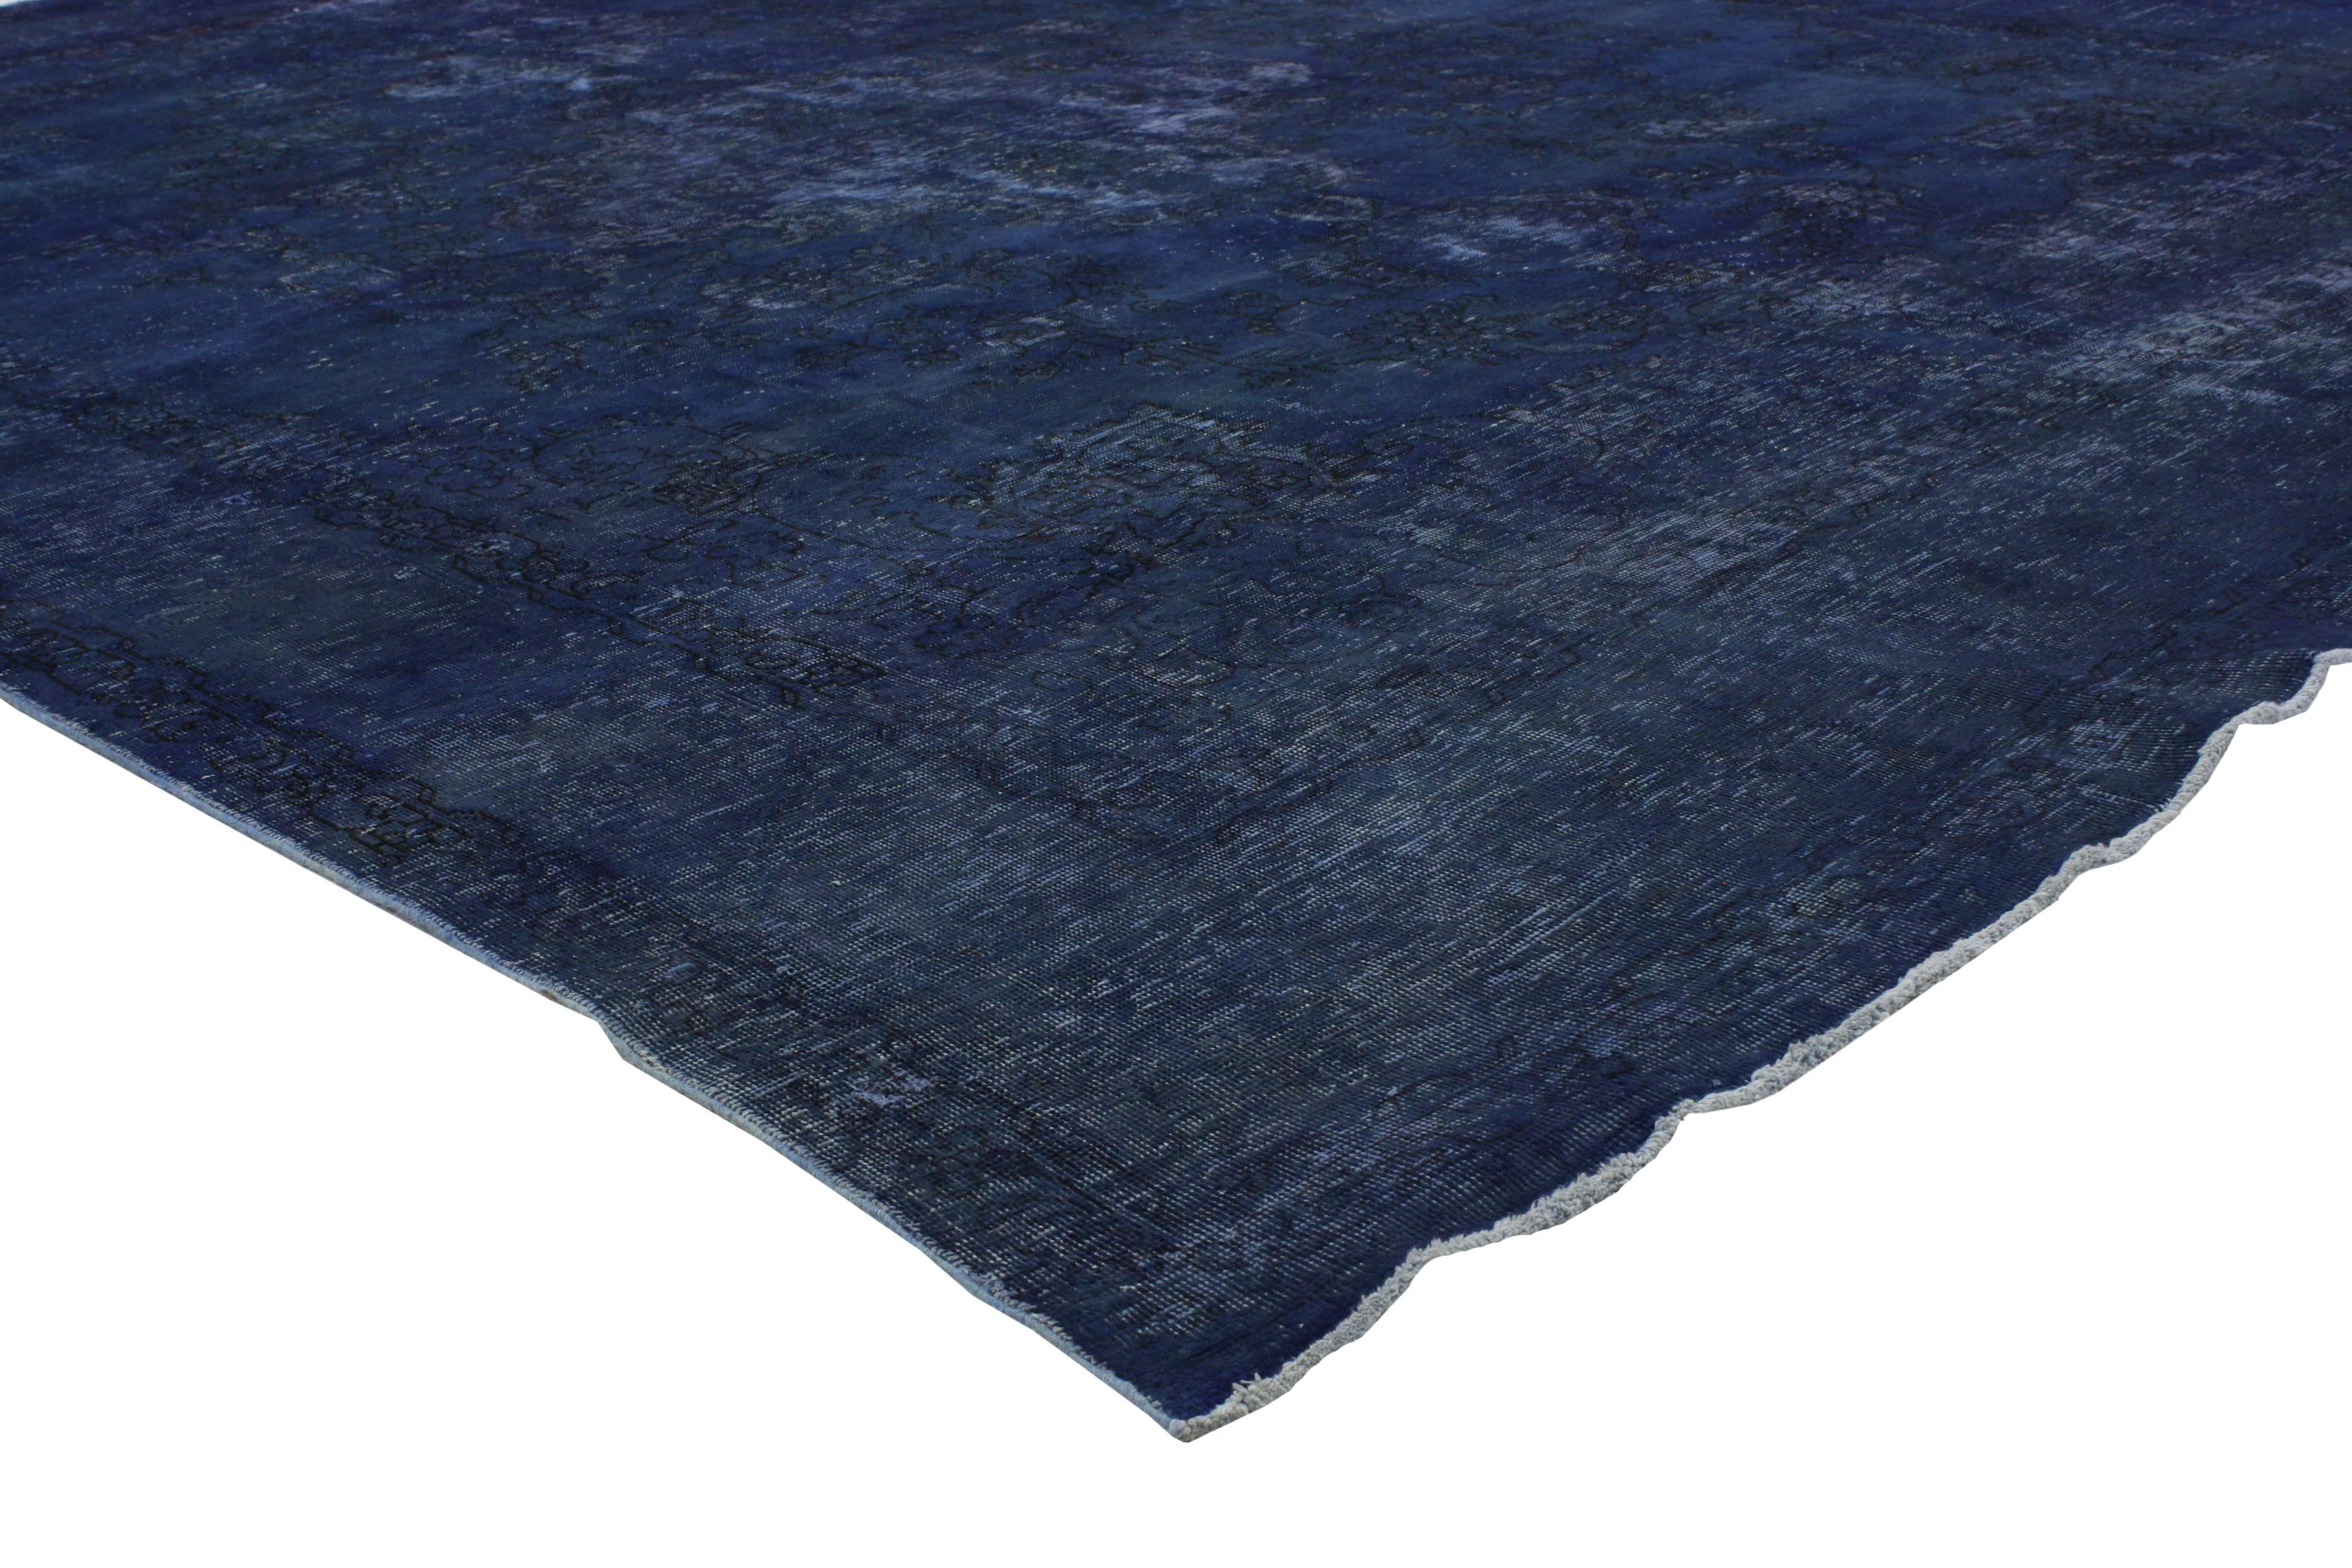 This distressed vintage Persian Tabriz rug overdyed in blue features a modern Industrial style. Characterized by an inconspicuous centre medallion and deeply saturated blue composition, this vintage Persian rug creates something a little more modern